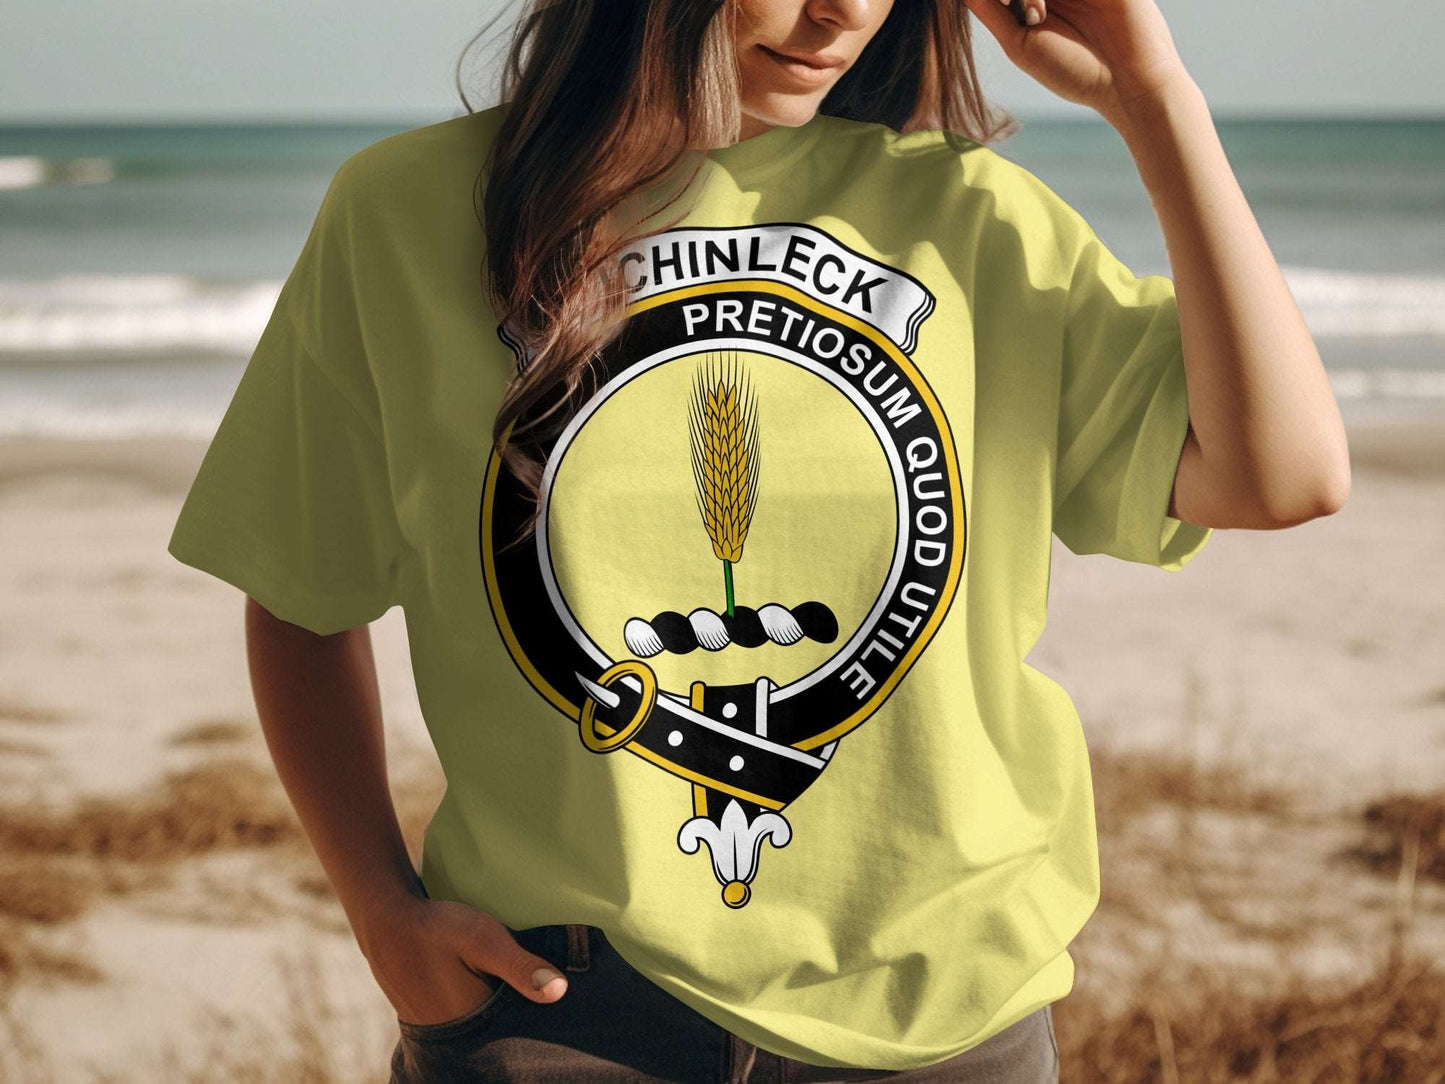 Auchinleck Scottish Clan Crested Highland Games T-Shirt - Living Stone Gifts